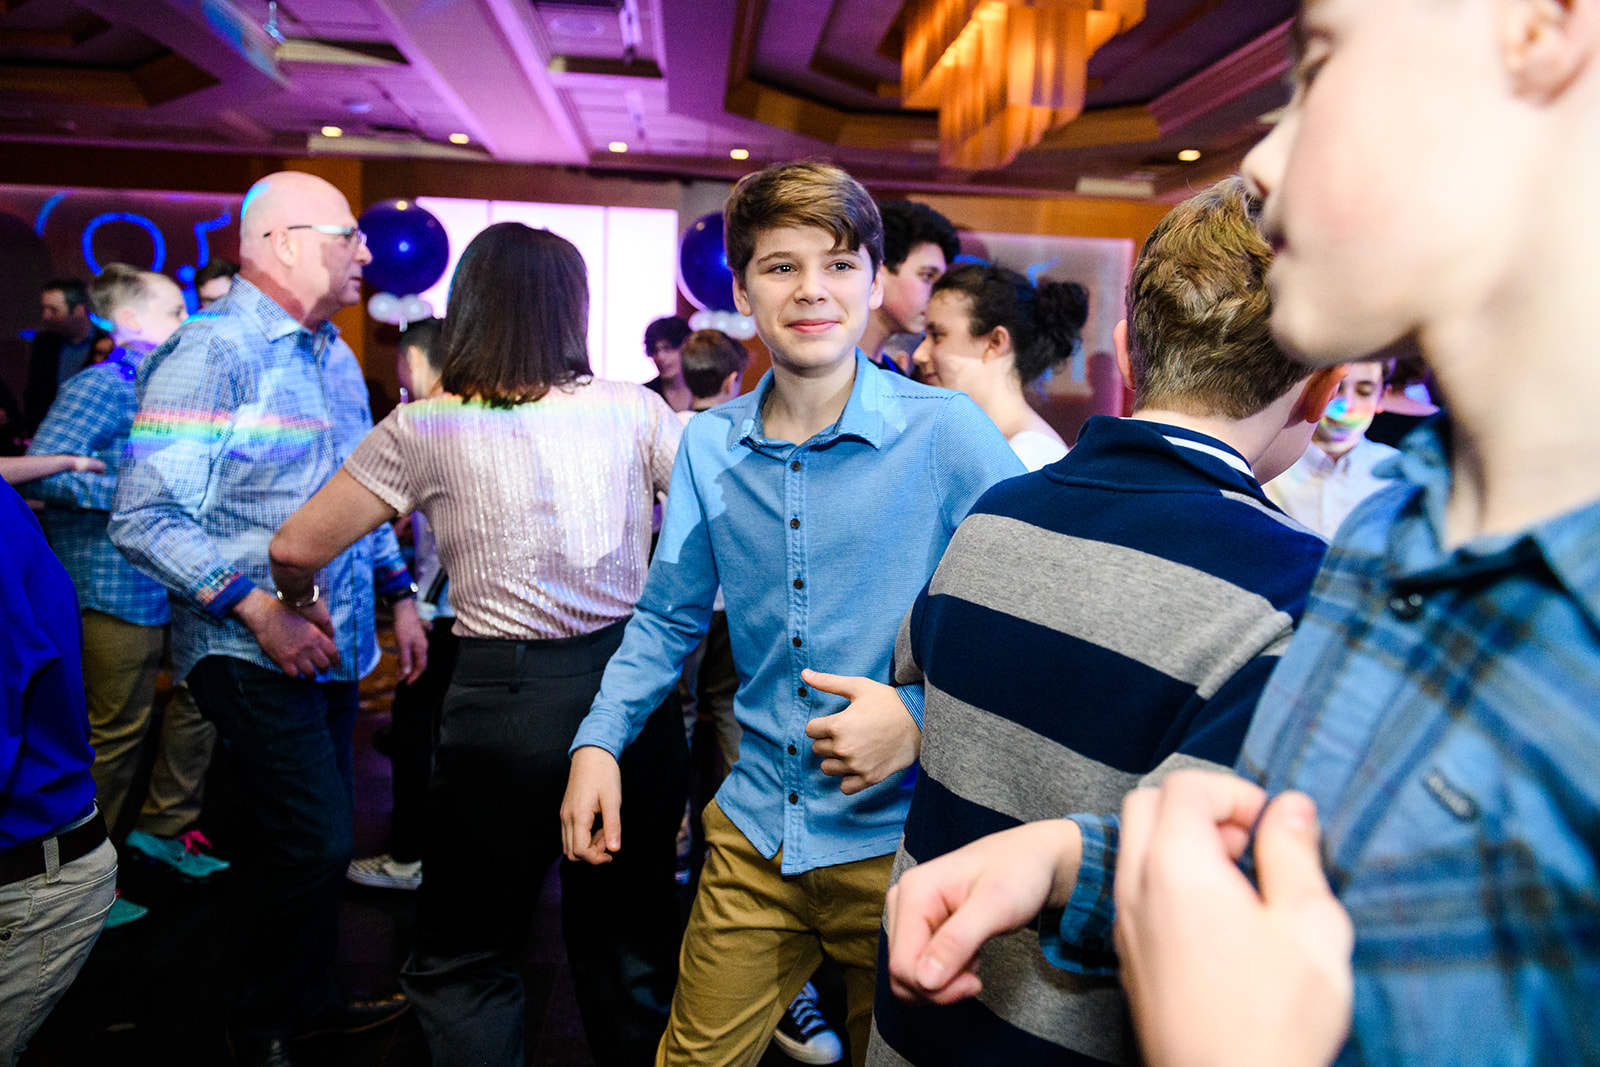 A teen boy dances with friends during his bar mitzvah with a Photobooth Rental Bellevue